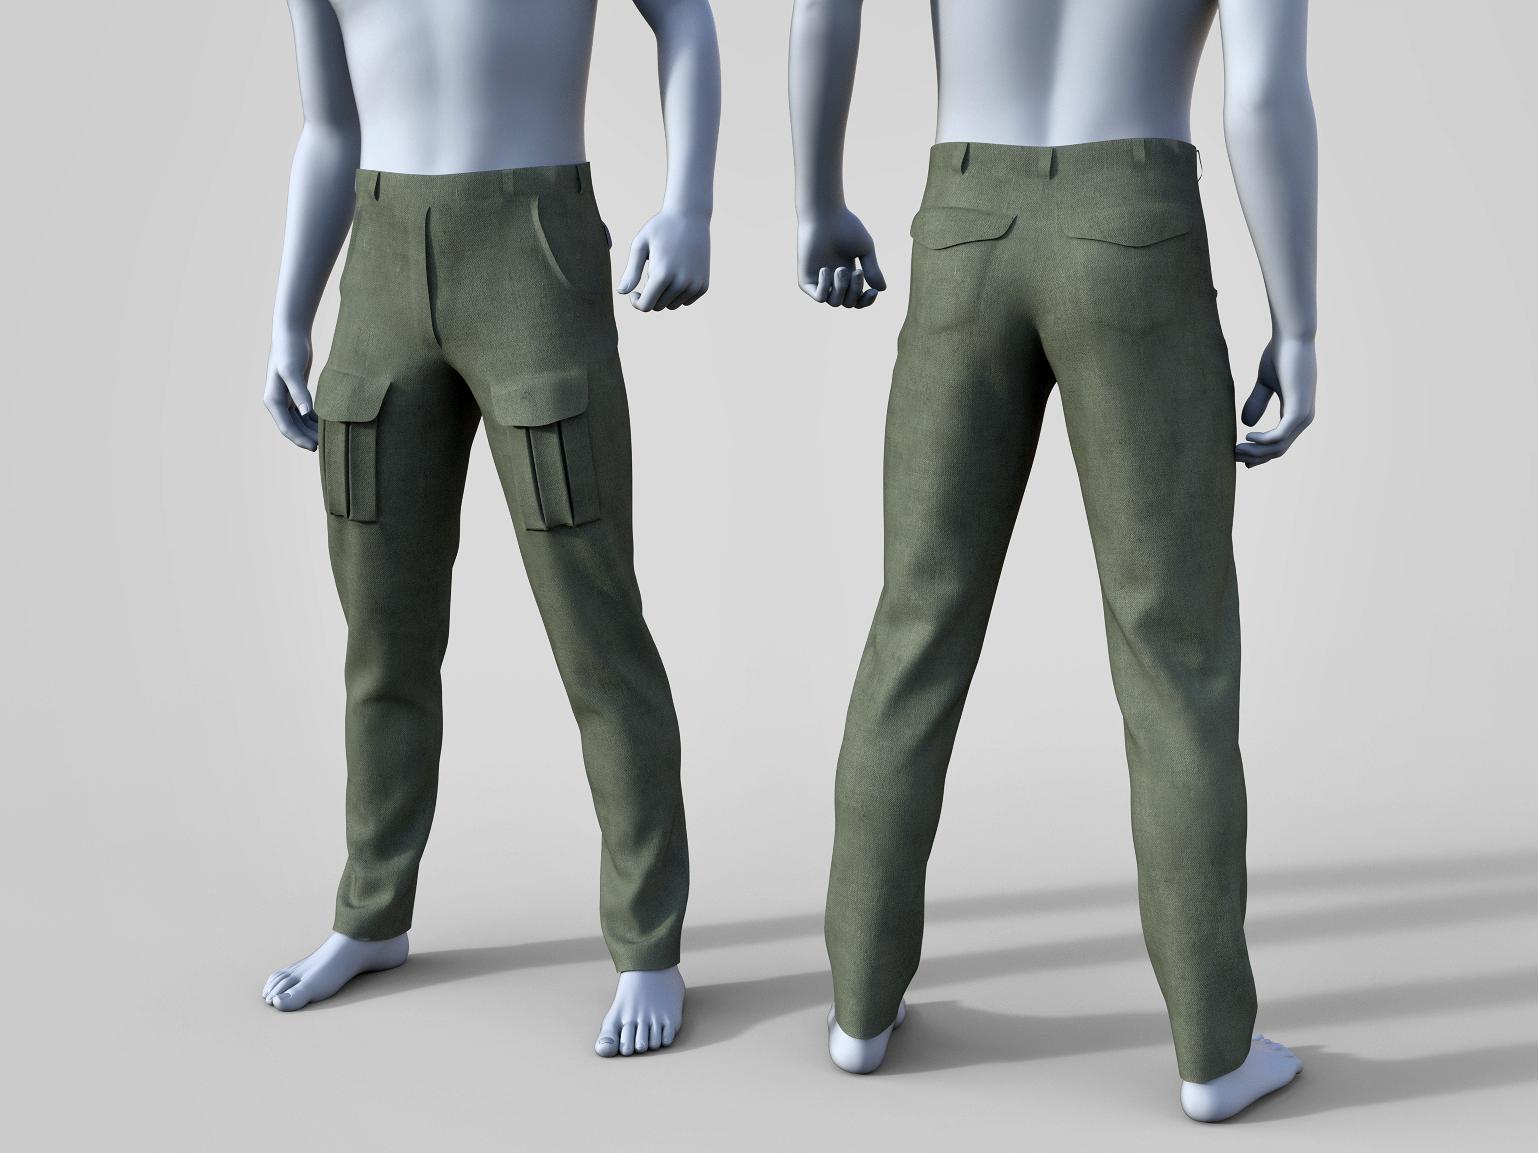 Opinions on Marvelous Designer Video Tutorial? - Page 4 - Daz 3D Forums